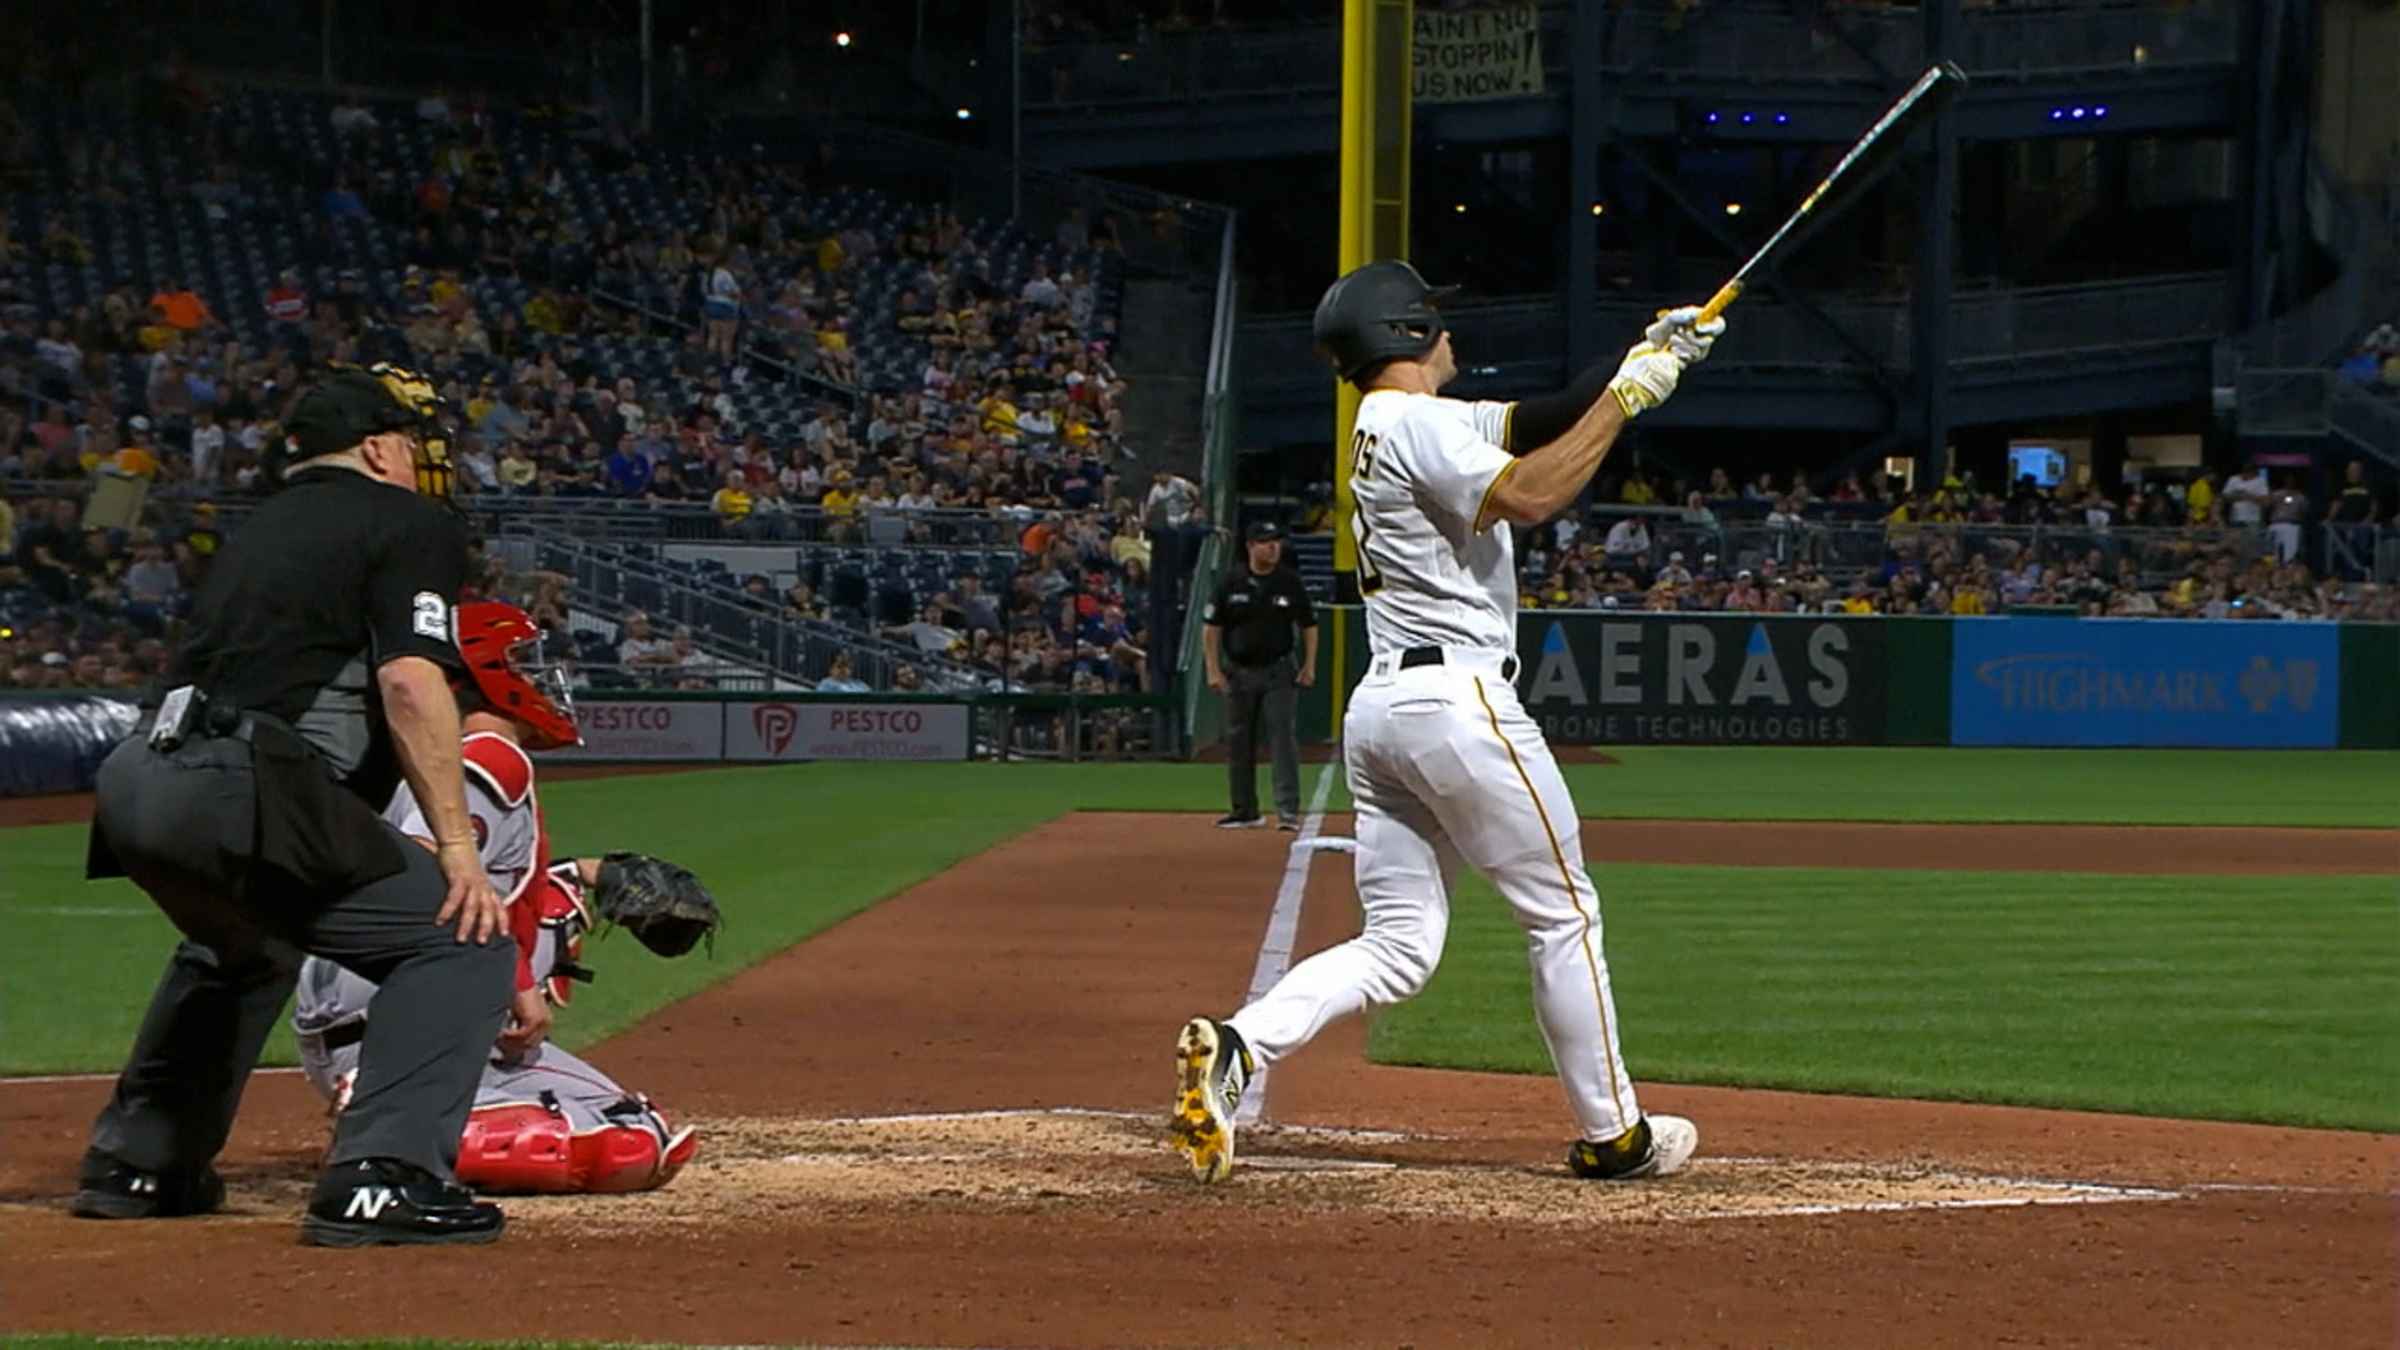 Reynolds homers twice as Pirates toppled Sox 8-2